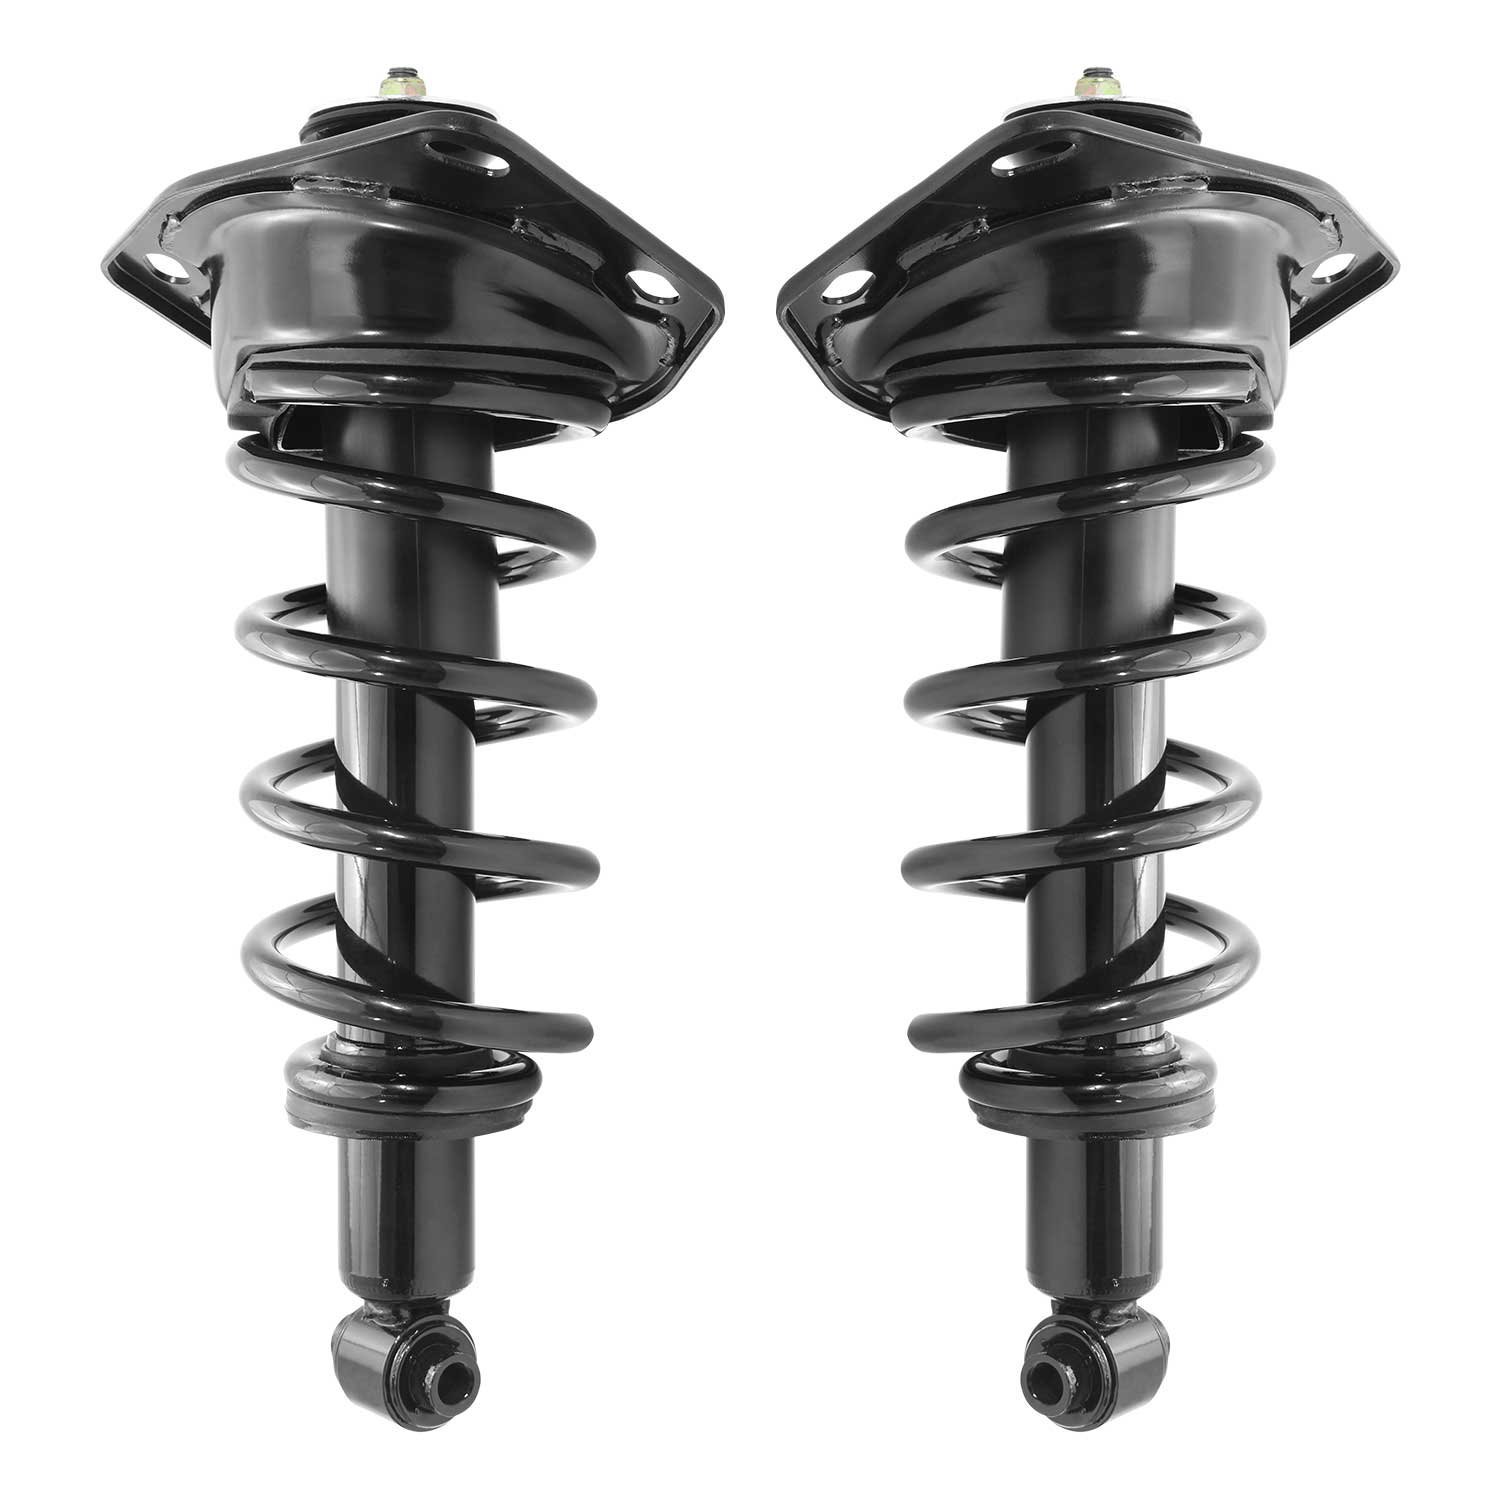 2-15201-15202-001 Suspension Strut & Coil Spring Assembly Set Fits Select Chevy Camaro